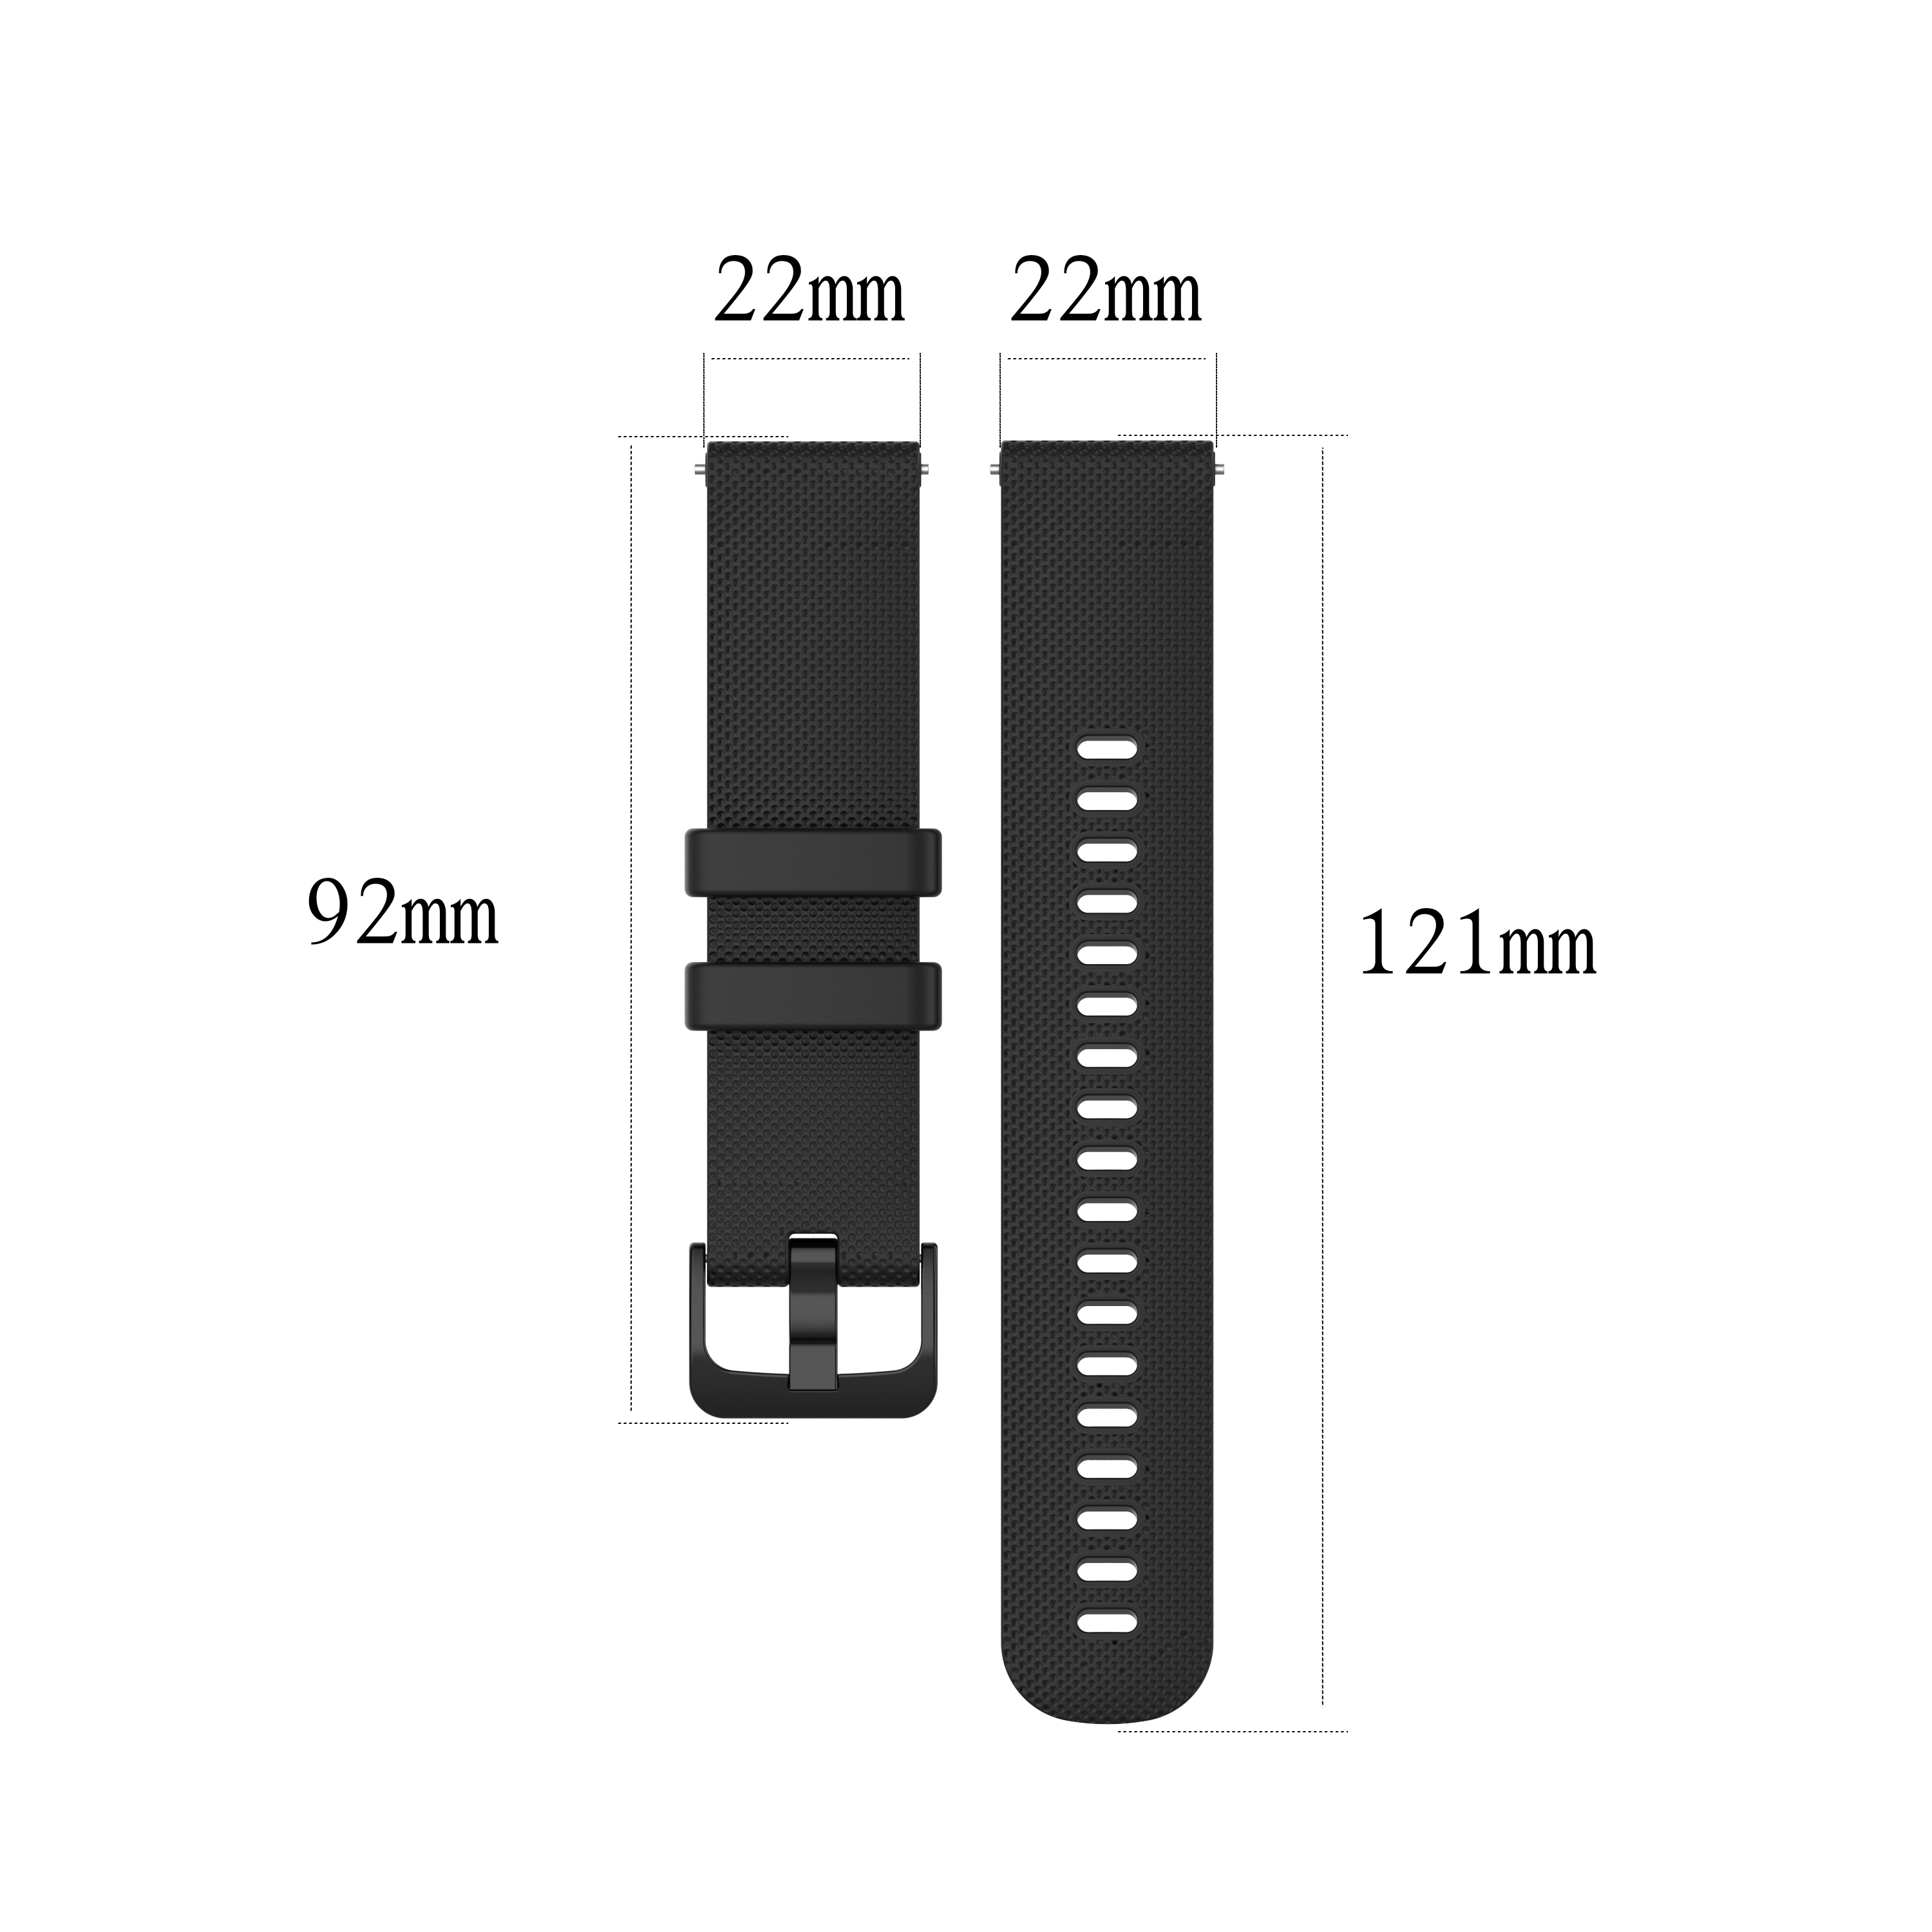 Bakeey-22mm-Universal-Watch-Band-Silicone-Watch-Strap-Replacement-for-HUAWEI-Watch-GT-1730954-2